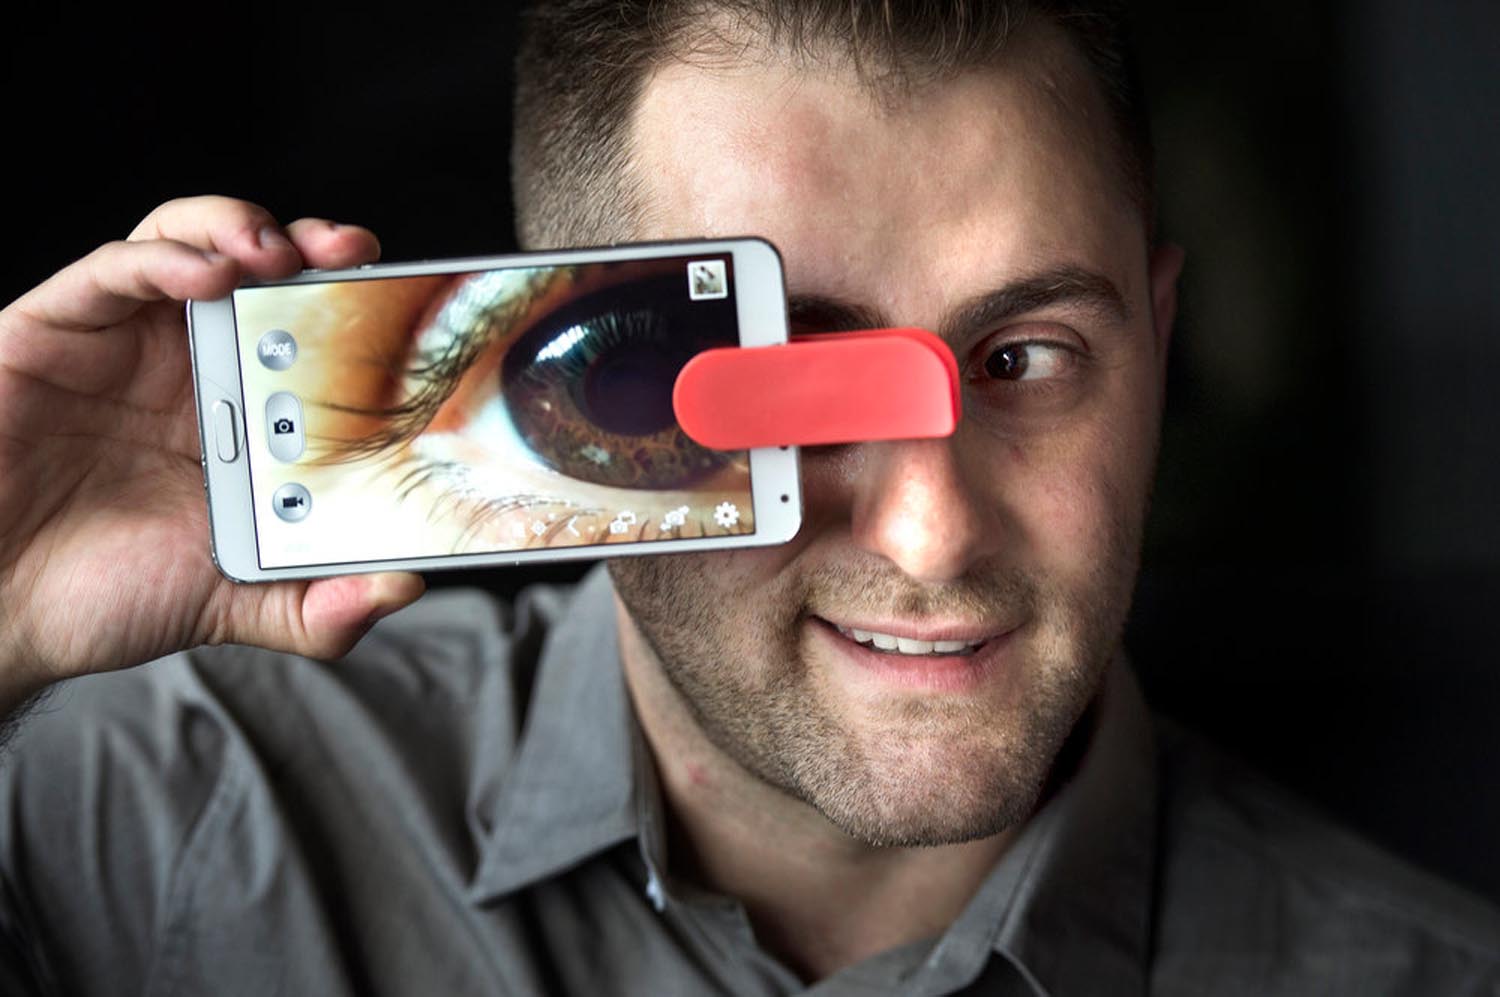  Aris Allahverdian, inventor, CEO of Mobi-Lens, shows his product. The lenses (wide angle, fish eye, macro) clip on to any smart device. The universal design fits over any smart device on front or back camera. 